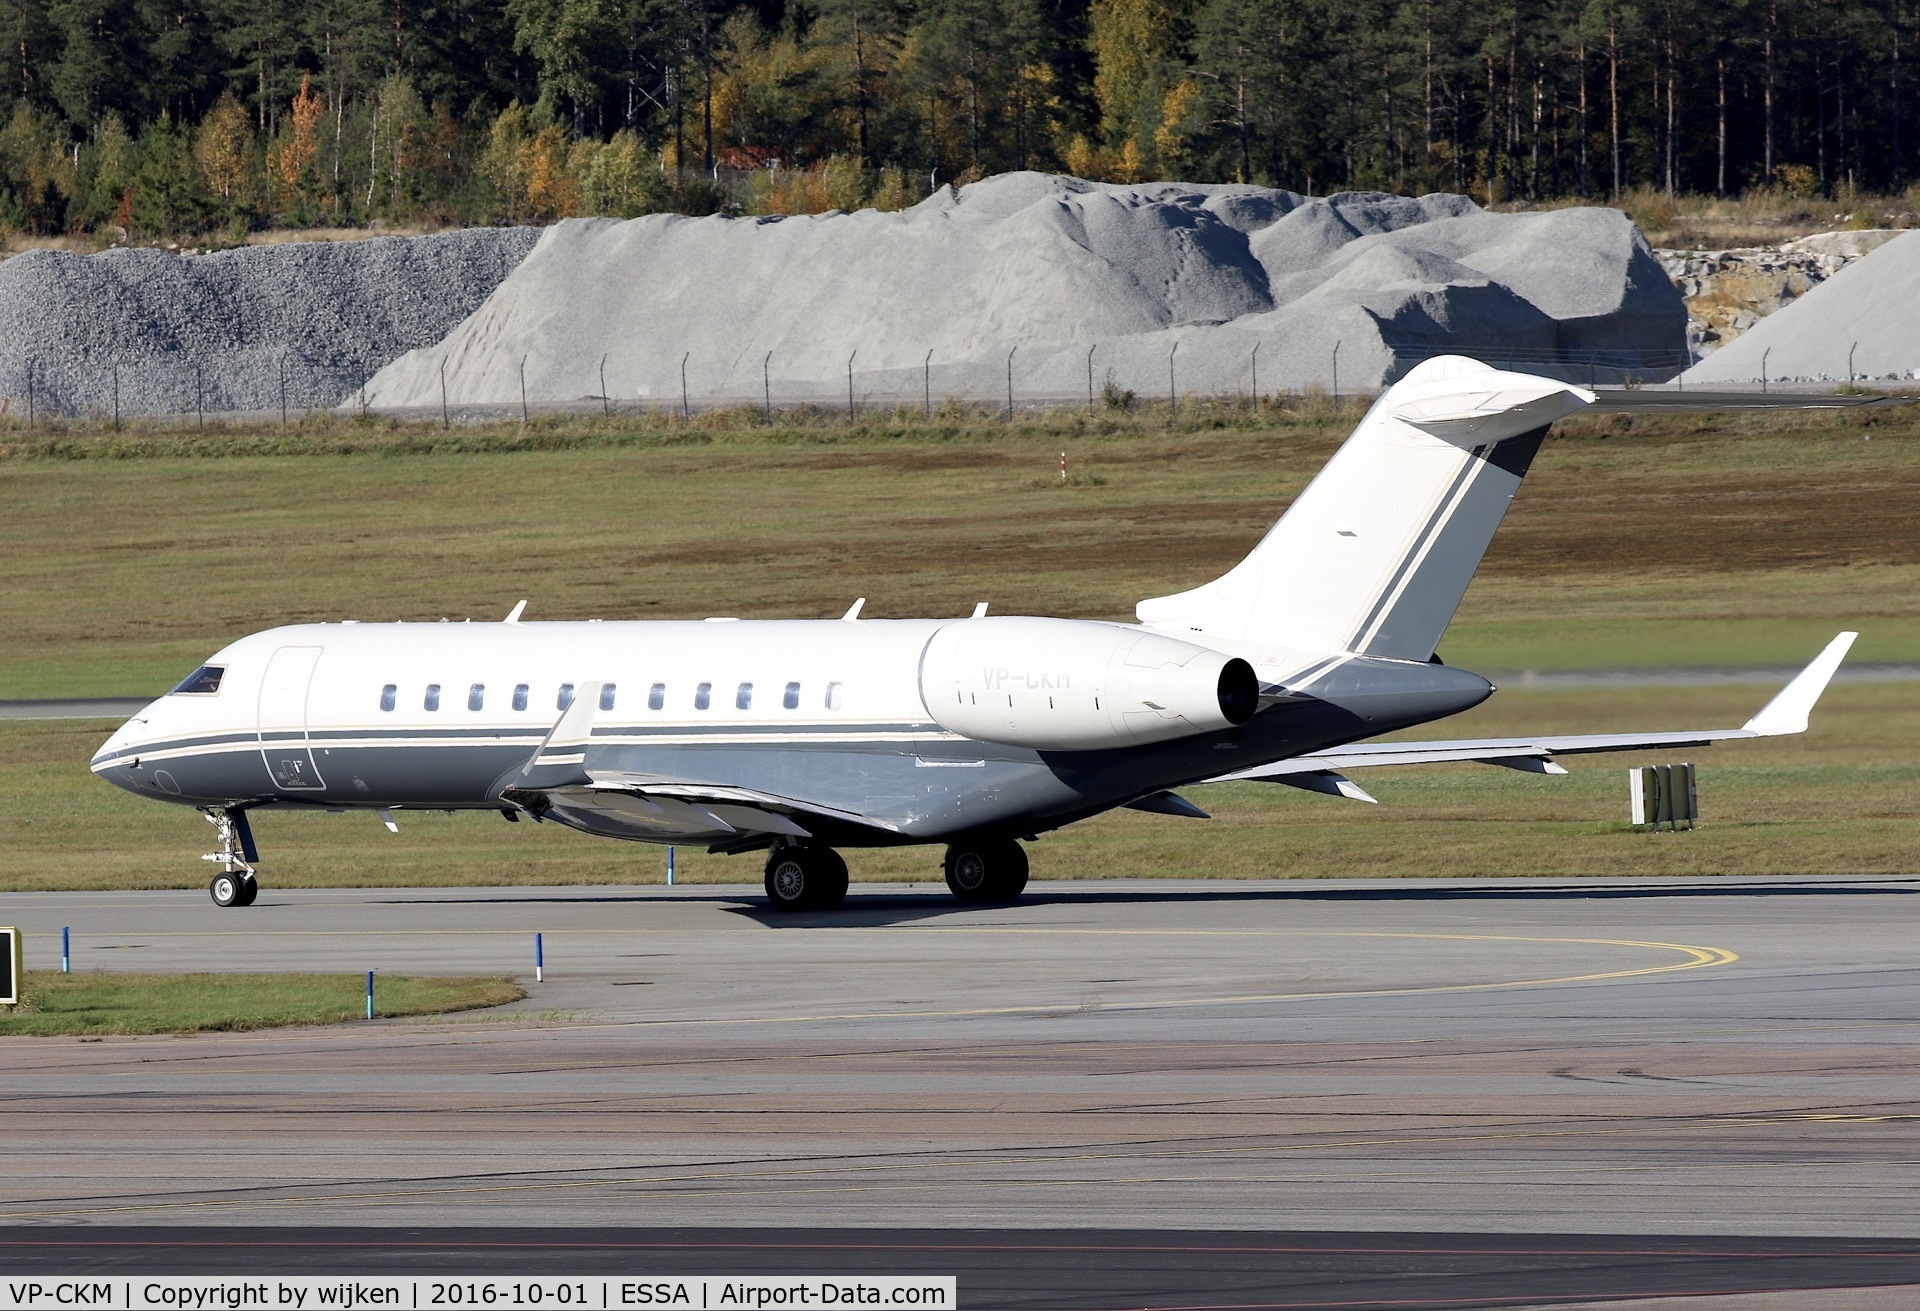 VP-CKM, 2013 Bombardier BD-700-1A11 Global 5000 C/N 9445, Taxiway X